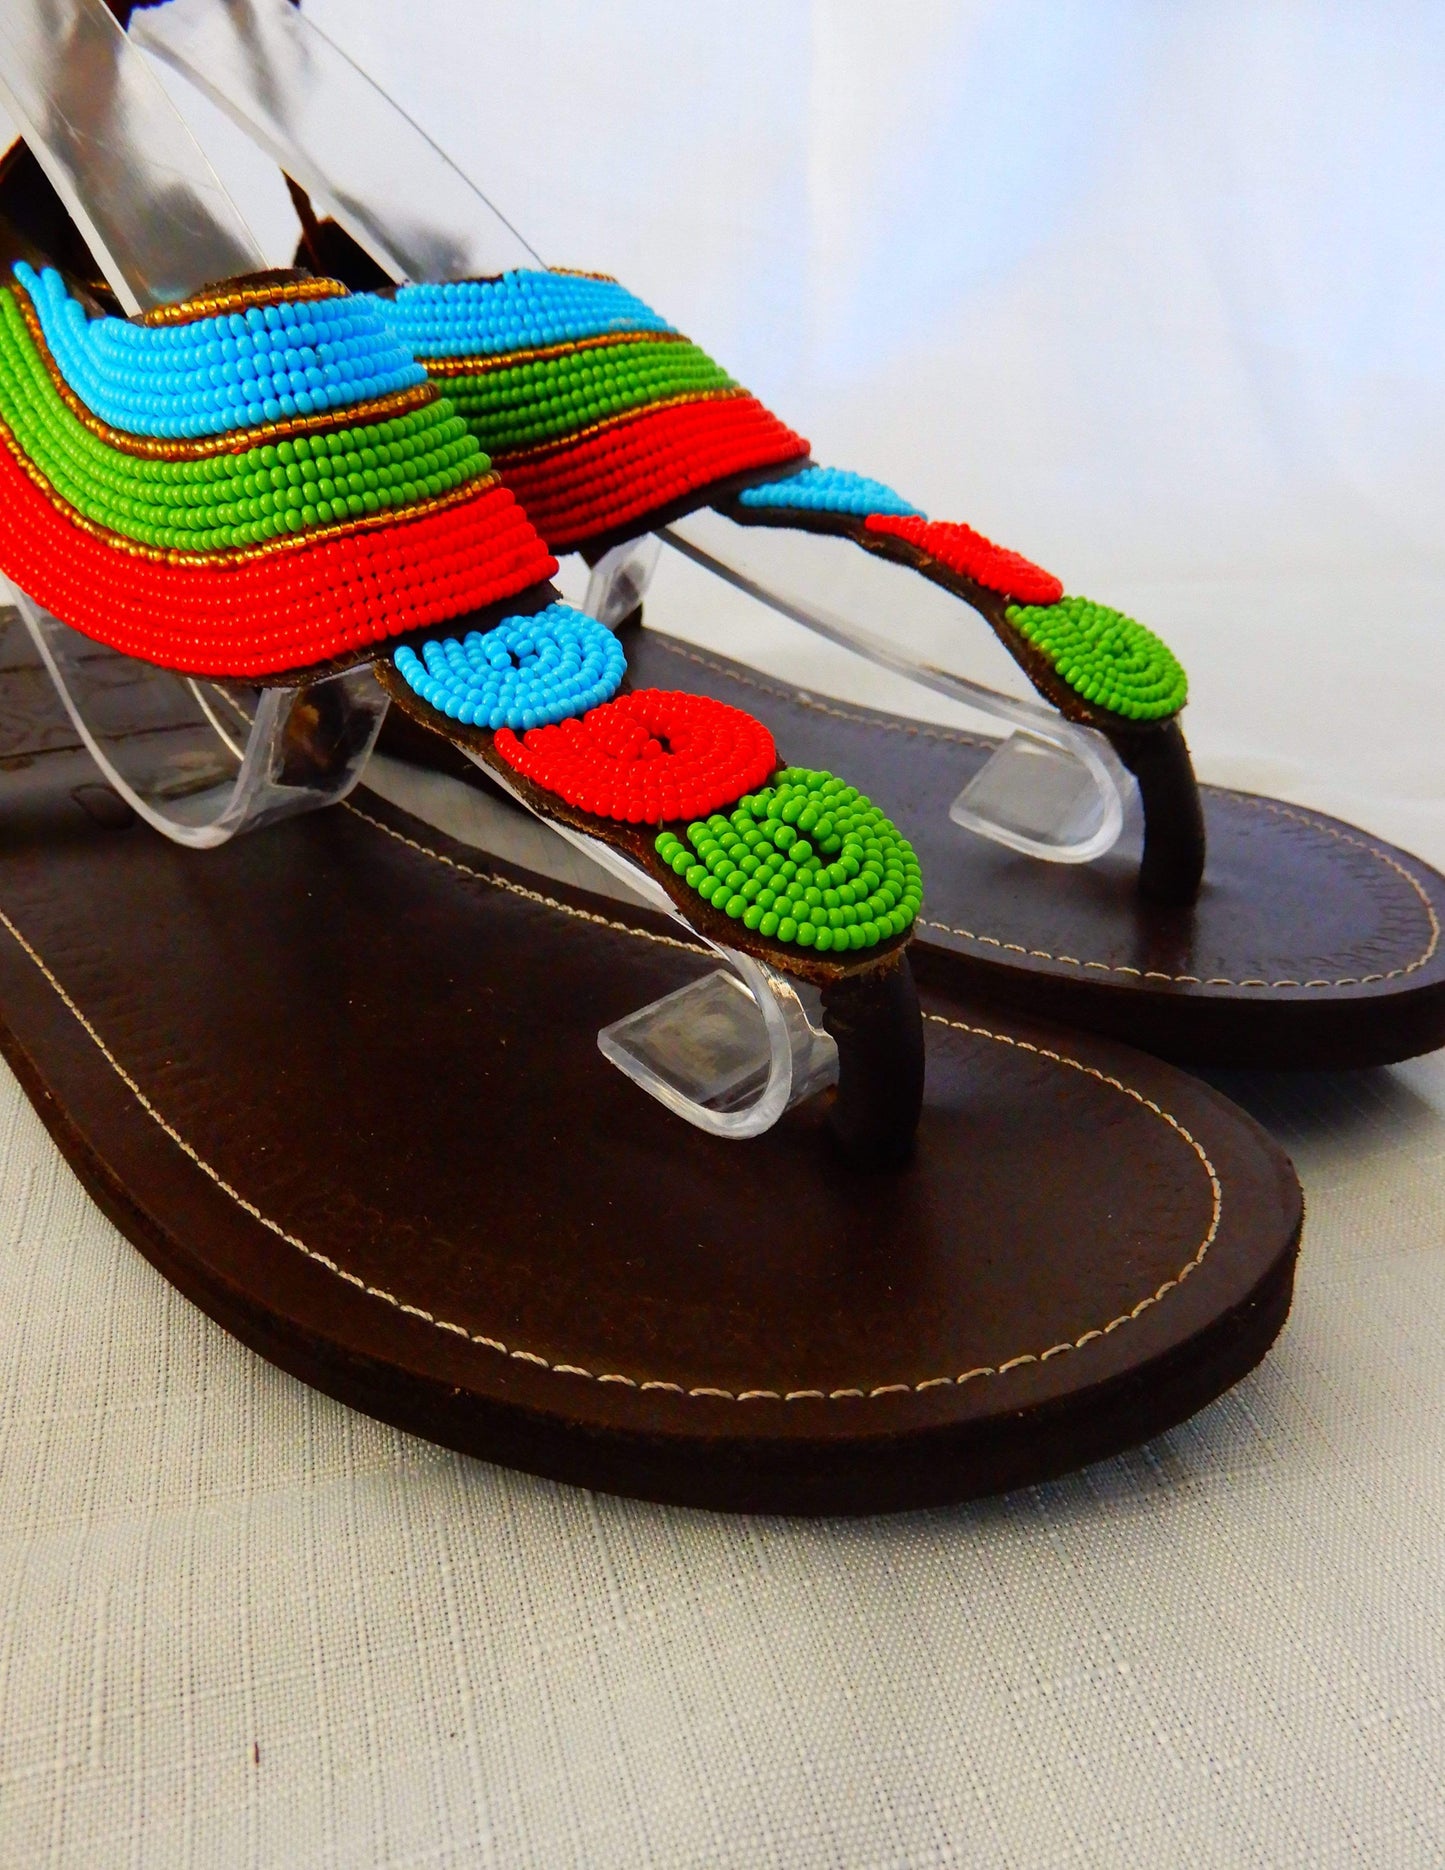 Afrix Style Shoes 40 (Size 9) Tropical African Sandals